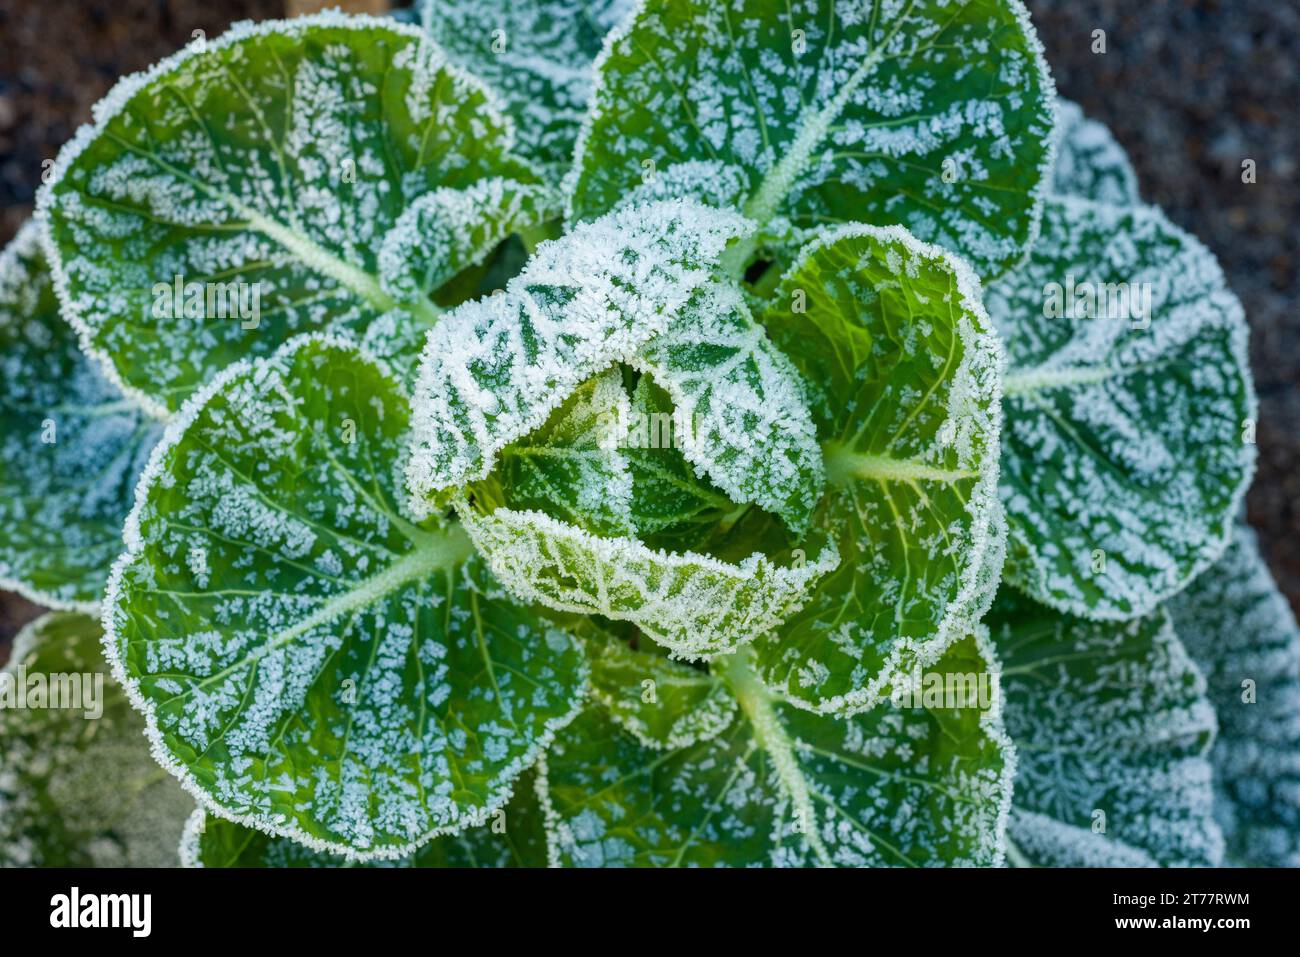 Winter frost on a Brussels sprout (Brassica oleracea Gemmifera) plant growing in an amateur vegetable garden. Stock Photo